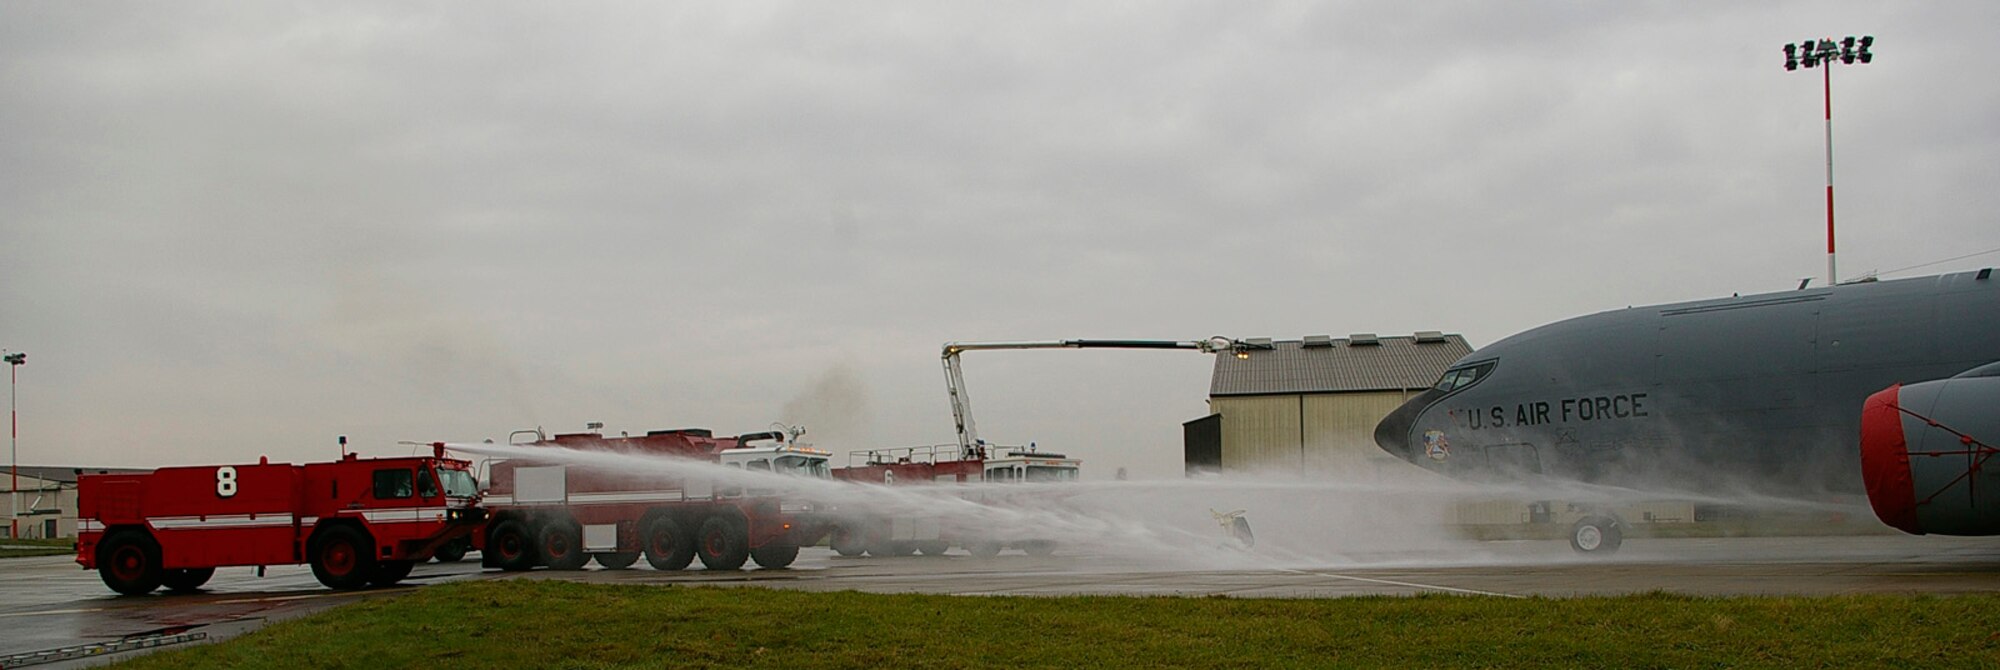 Firetrucks shoot water onto a KC-135 Nov. 13 during a training exercise simulating a fire on an aircraft engine. Six vehicles an almost 20 firefighters were involved in the exercise. (Air Force photo by Karen Abeyasekere)